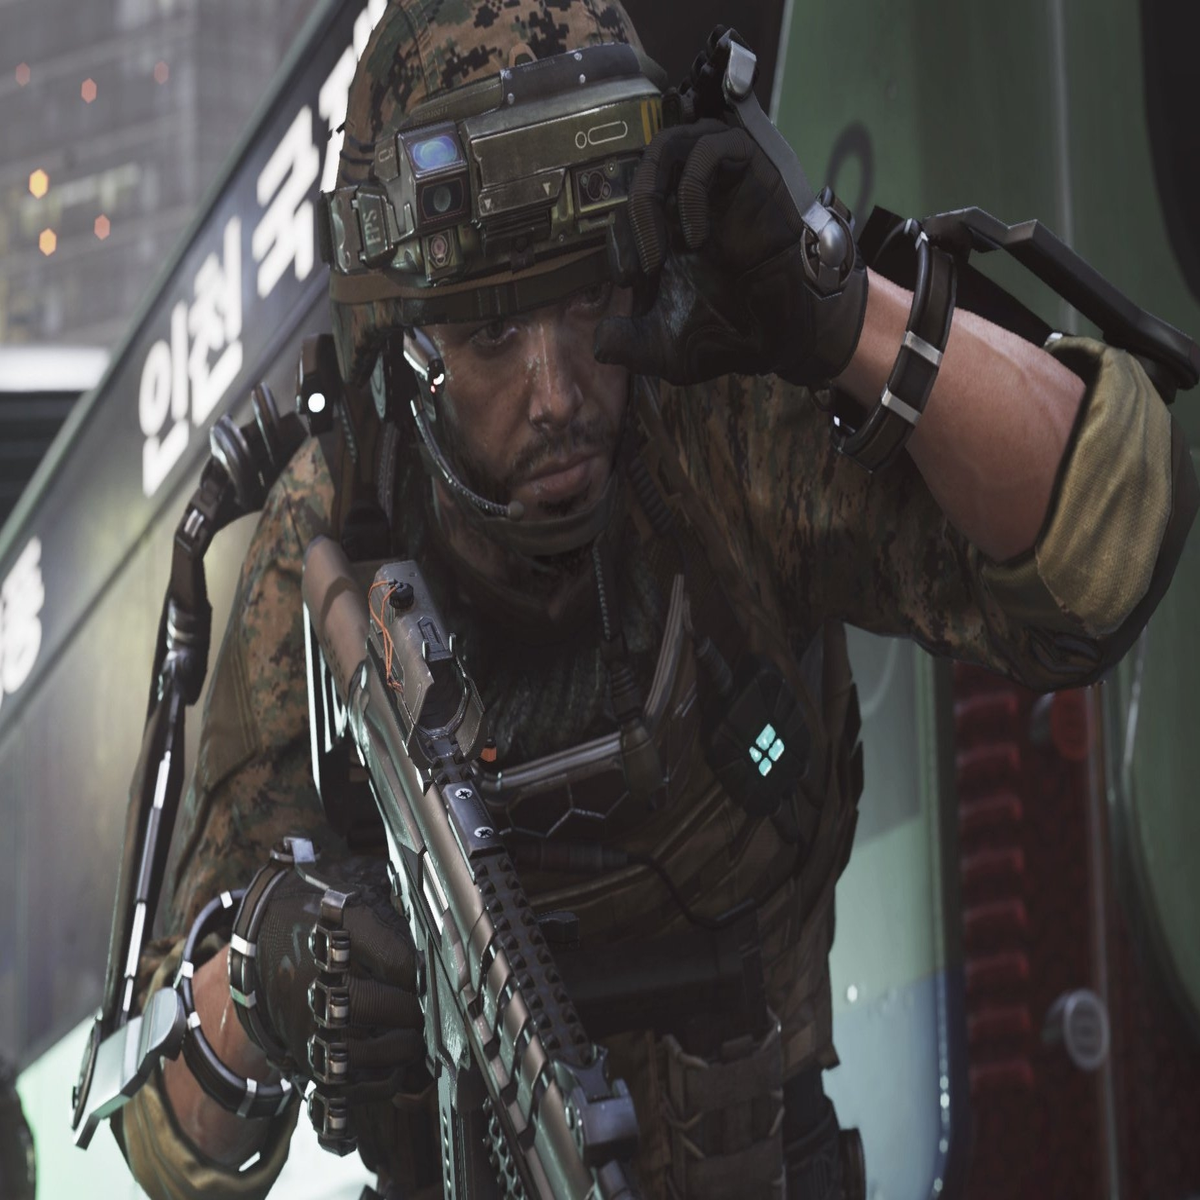 Digital Foundry: Hands-on with COD: Advanced Warfare multiplayer